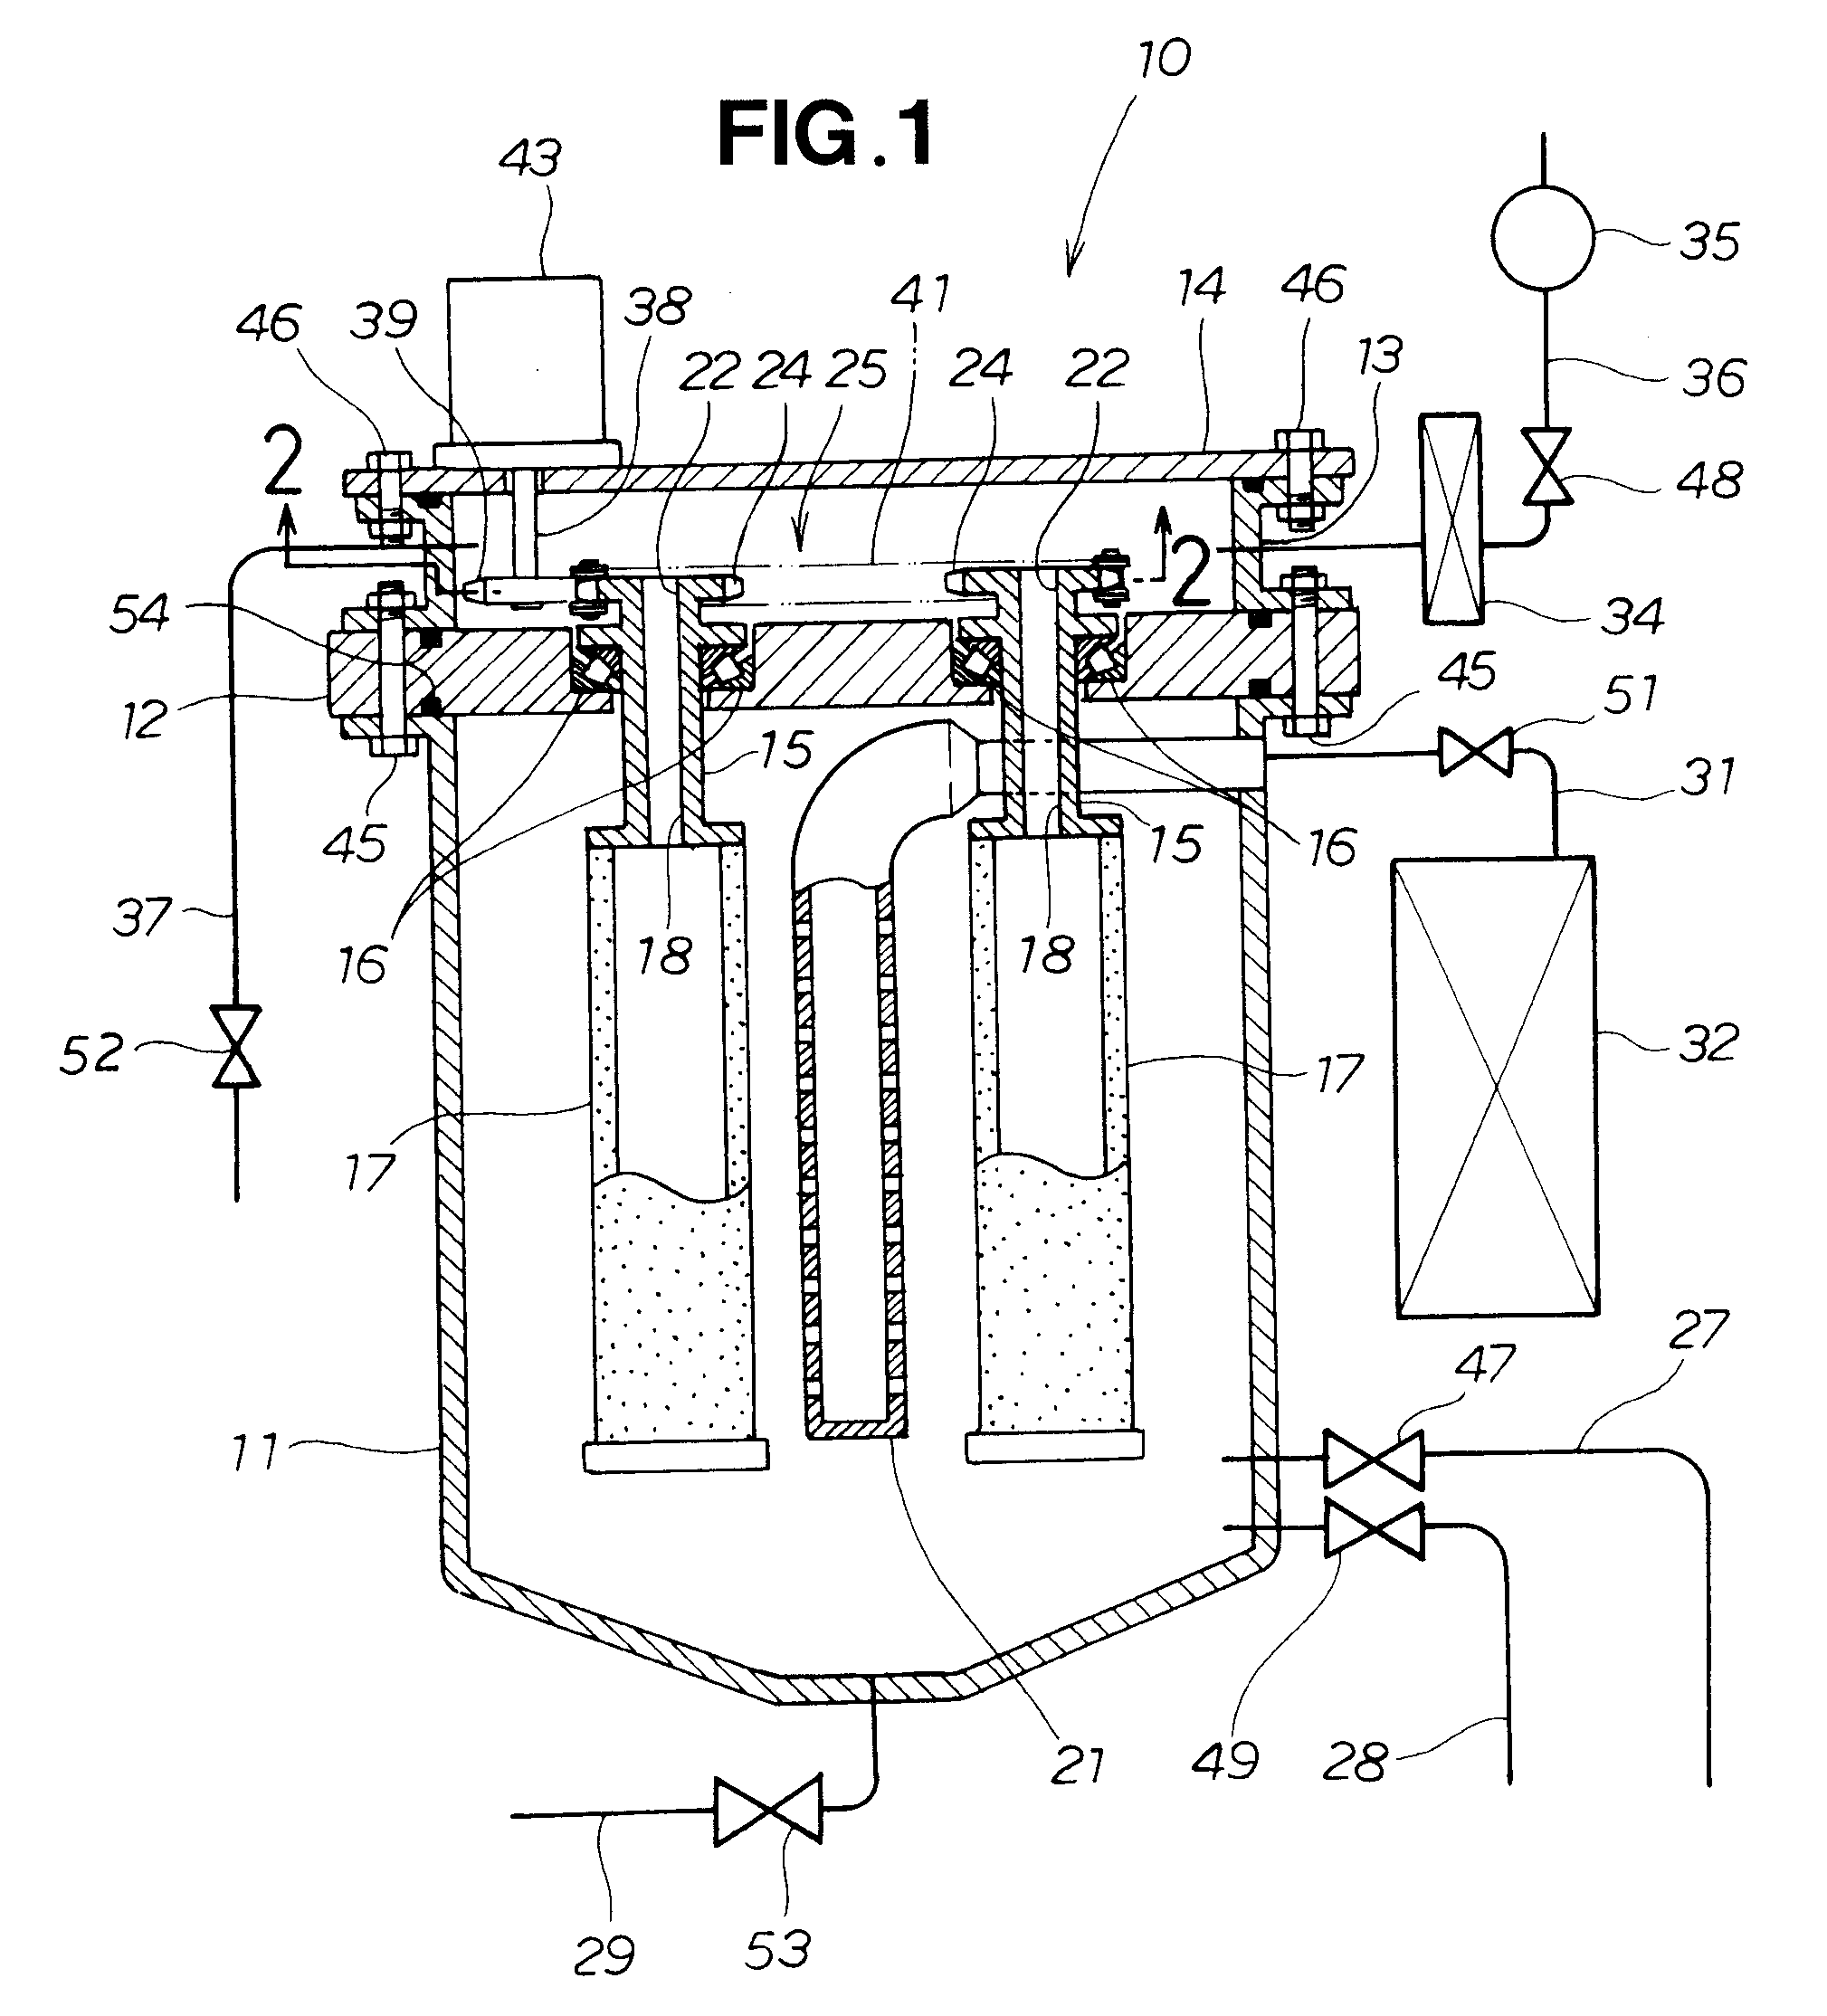 Wastewater filtering apparatus